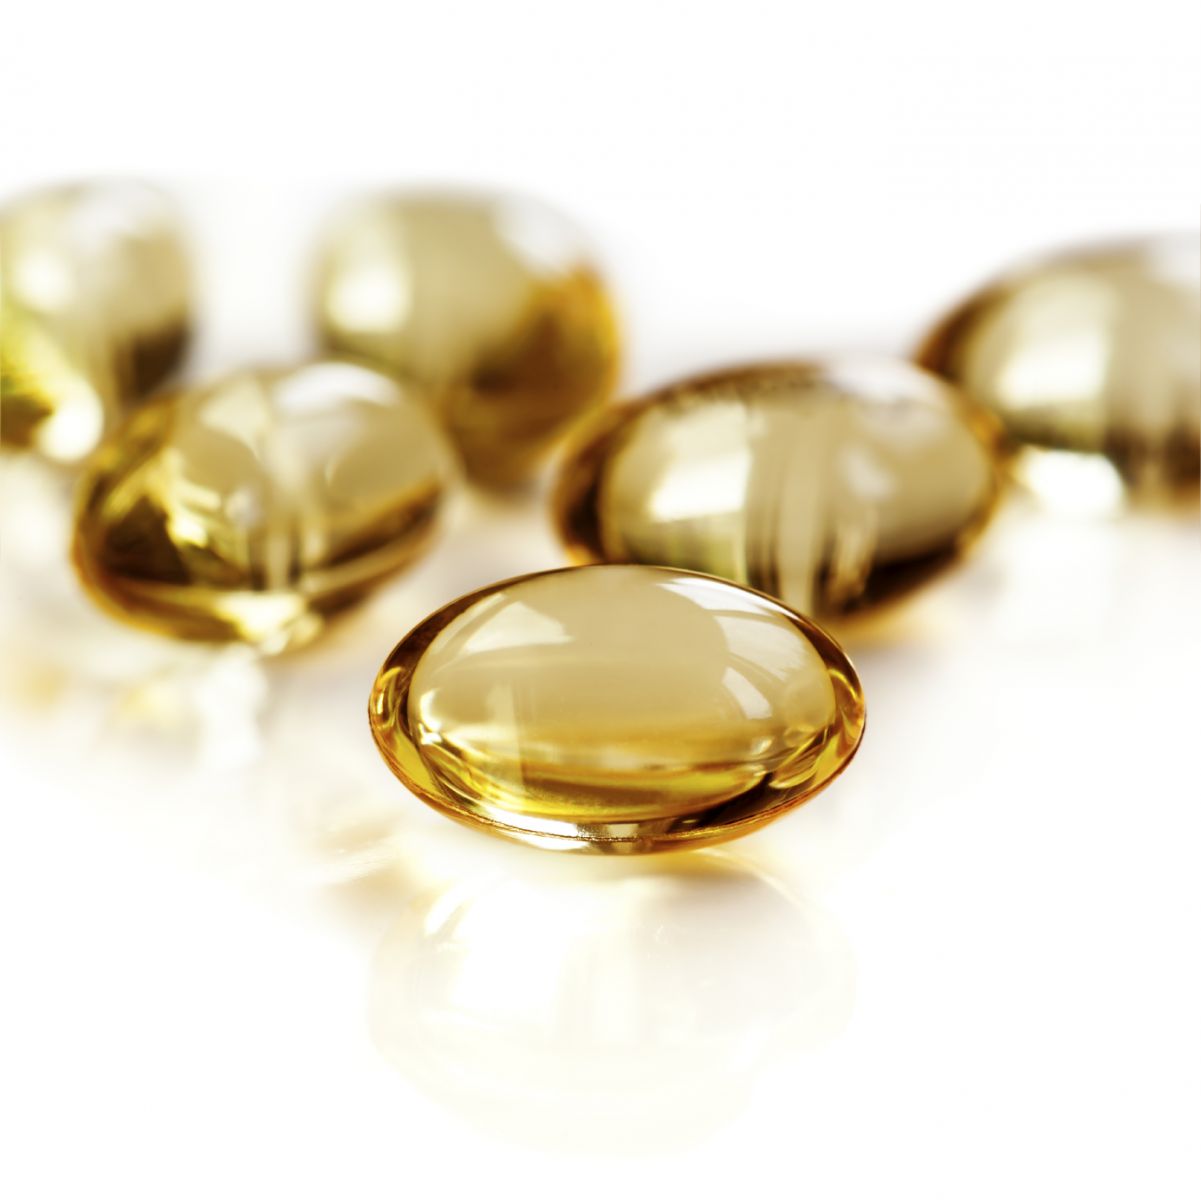 6 Things You Should Know About Vitamin D Harvard Health